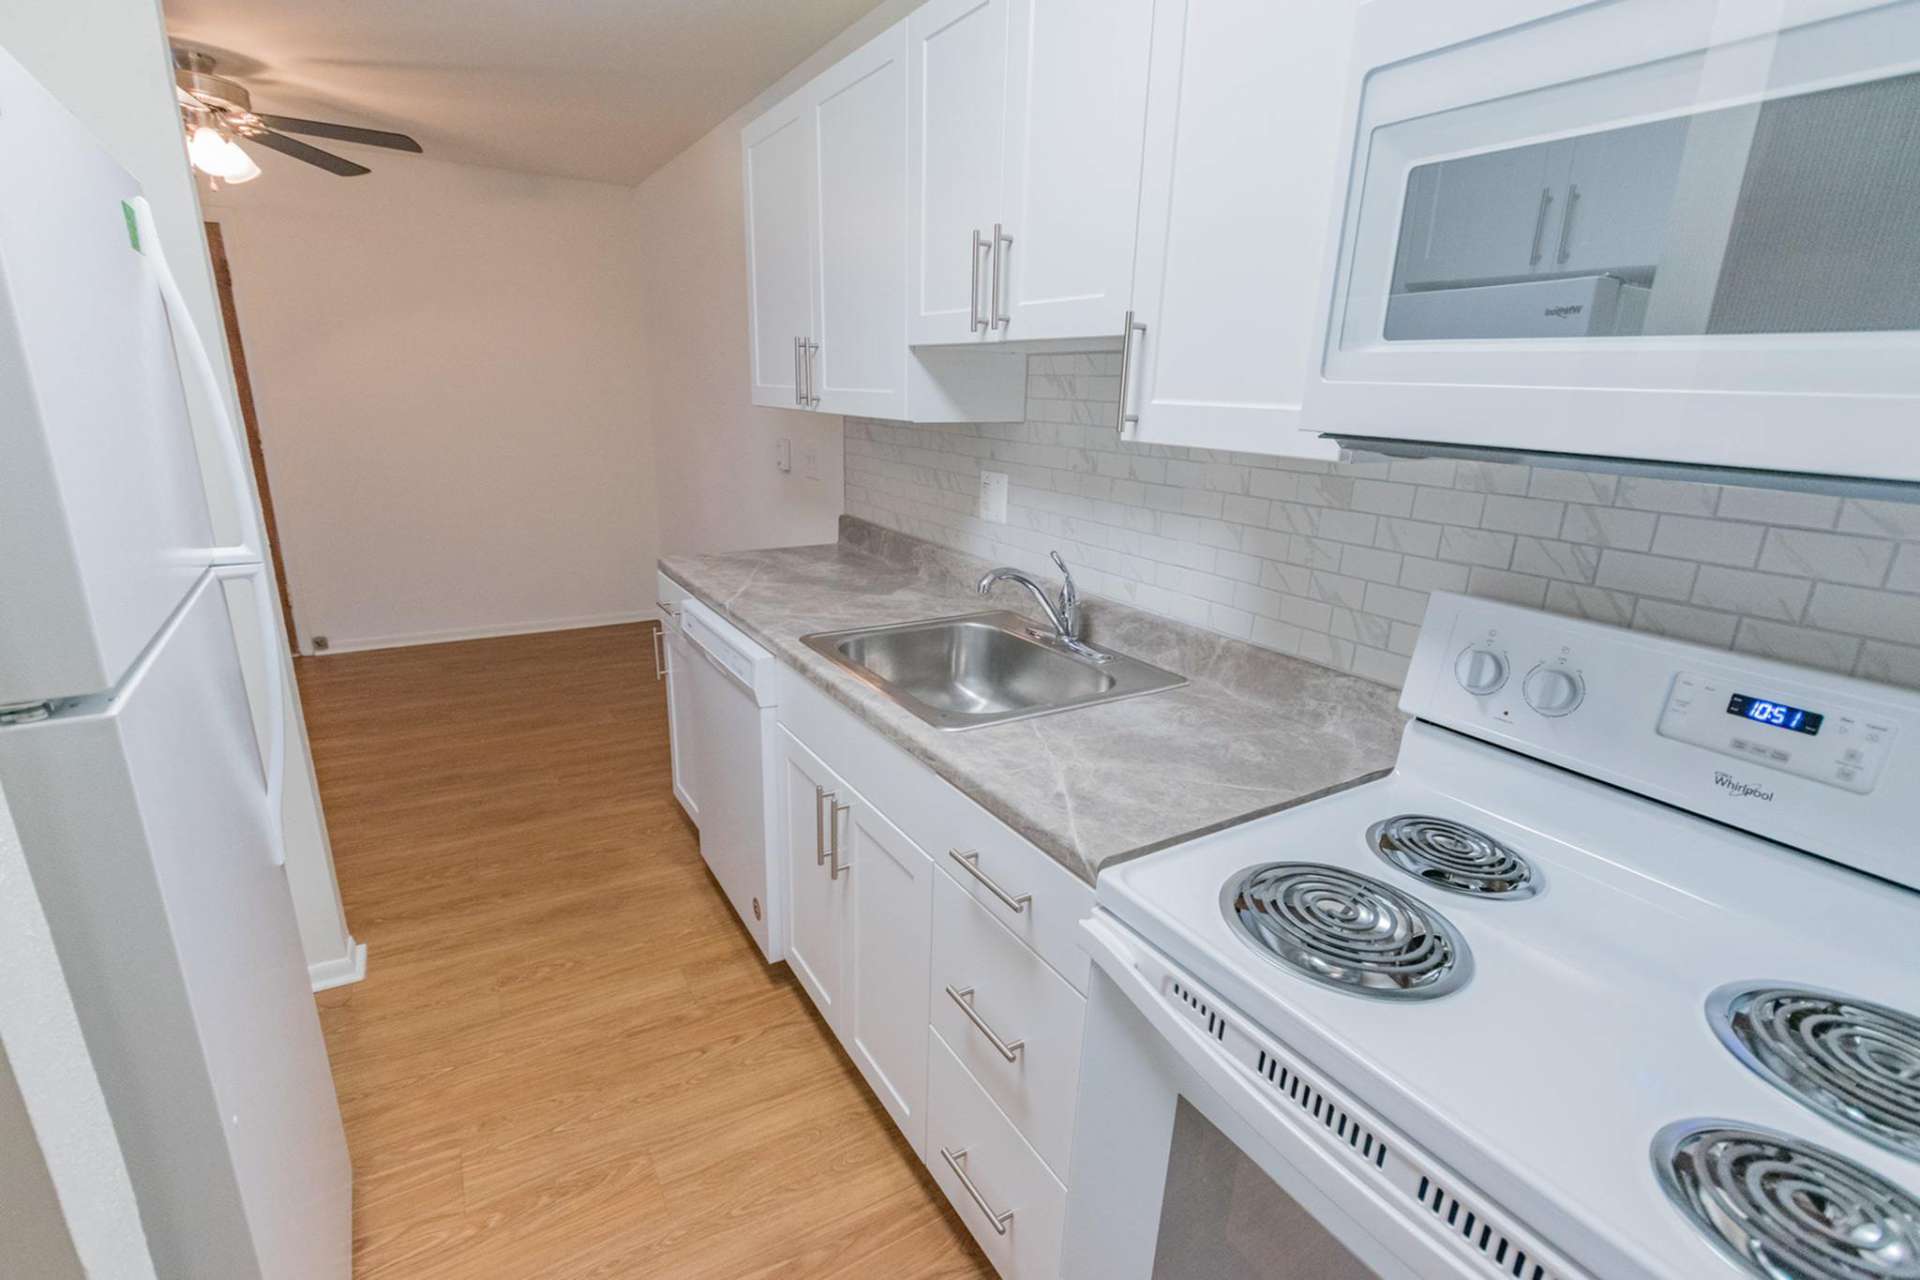 Kitchen area with wooden floors, a microwave, stovetop oven, and fridge with hardwood floors.